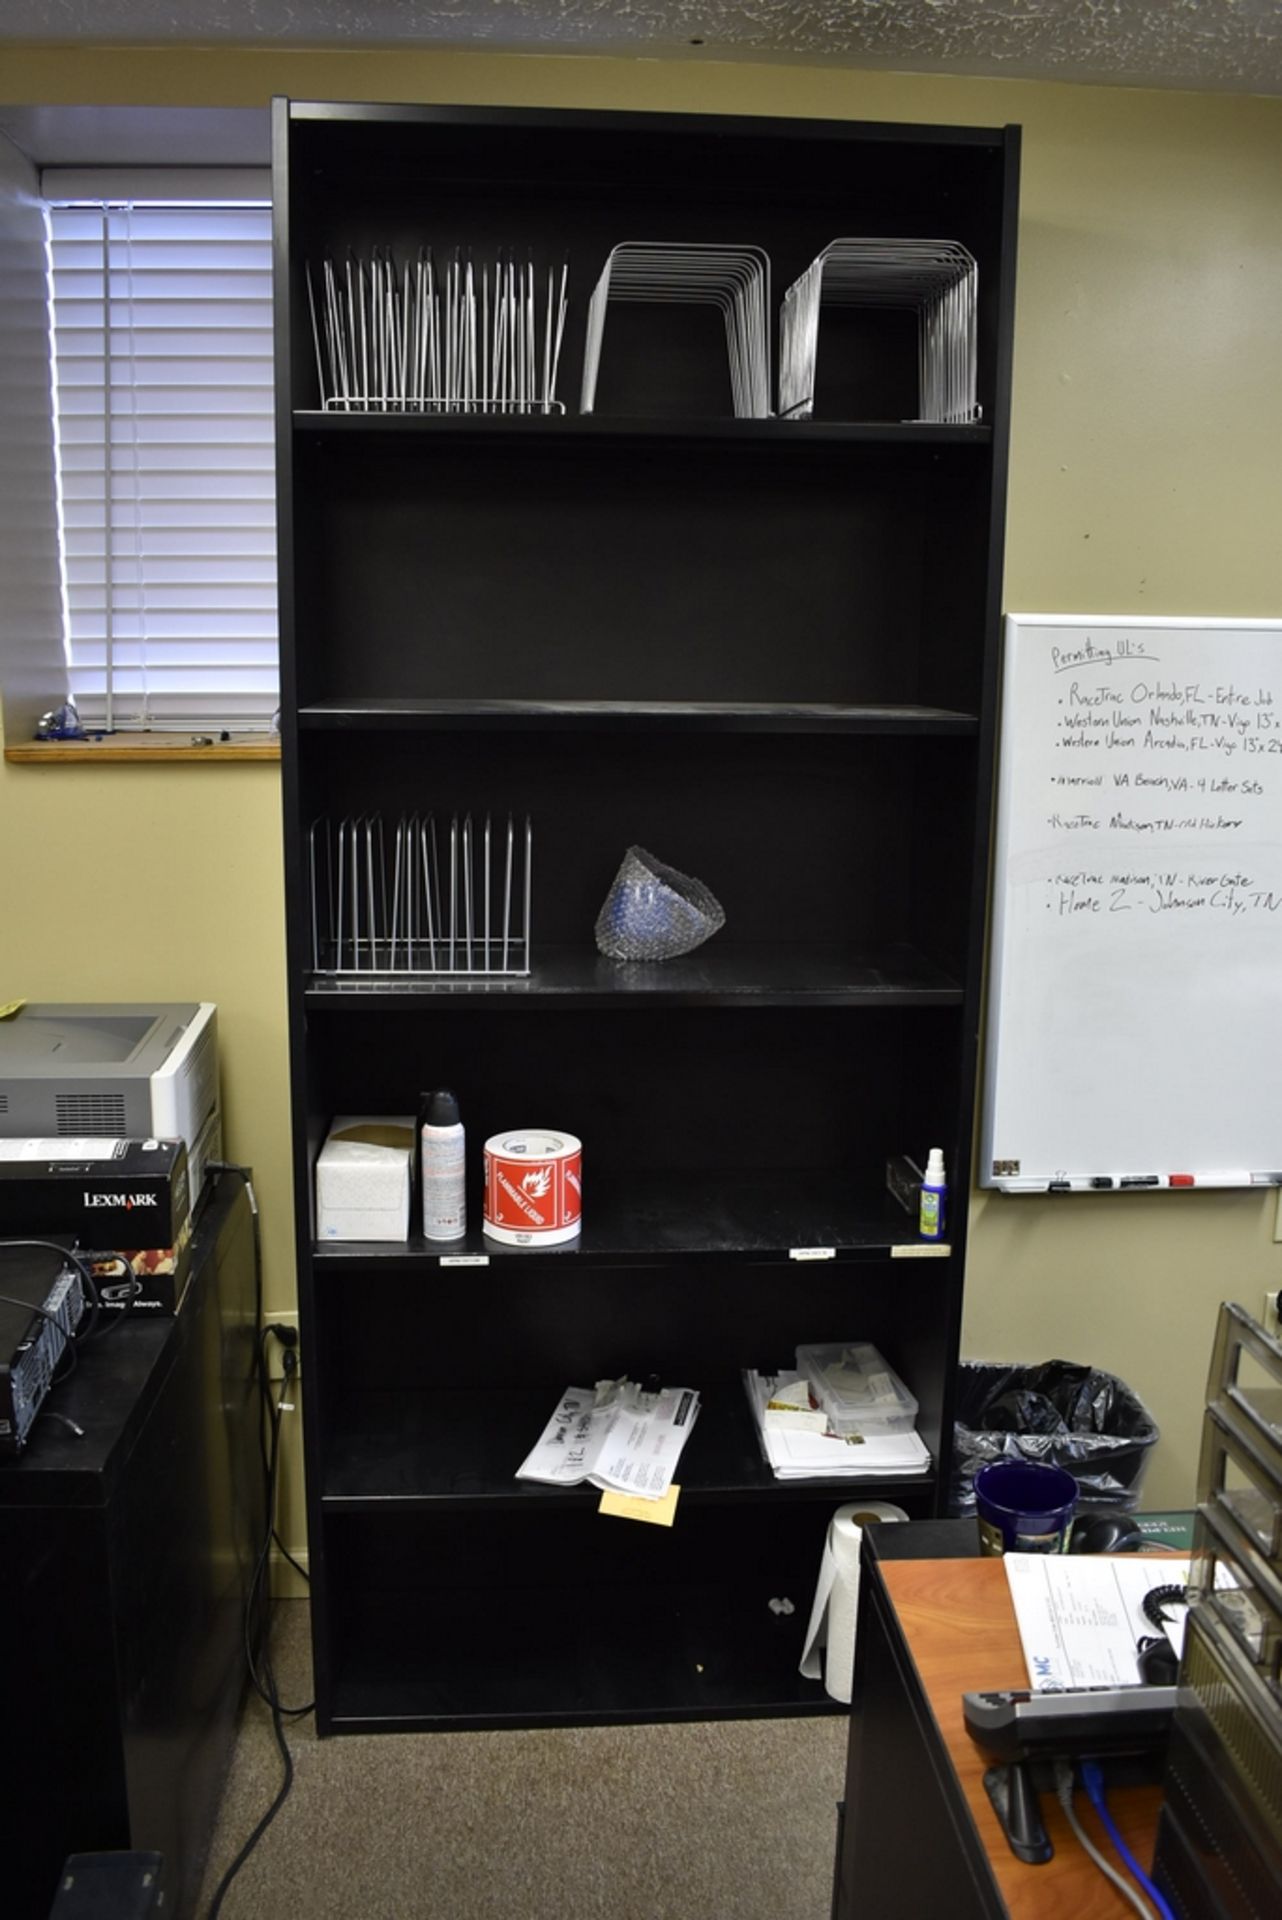 DESK, EXECUTIVE CHAIR, (2) FILE CABINETS, SHELVING UNIT - Image 2 of 2